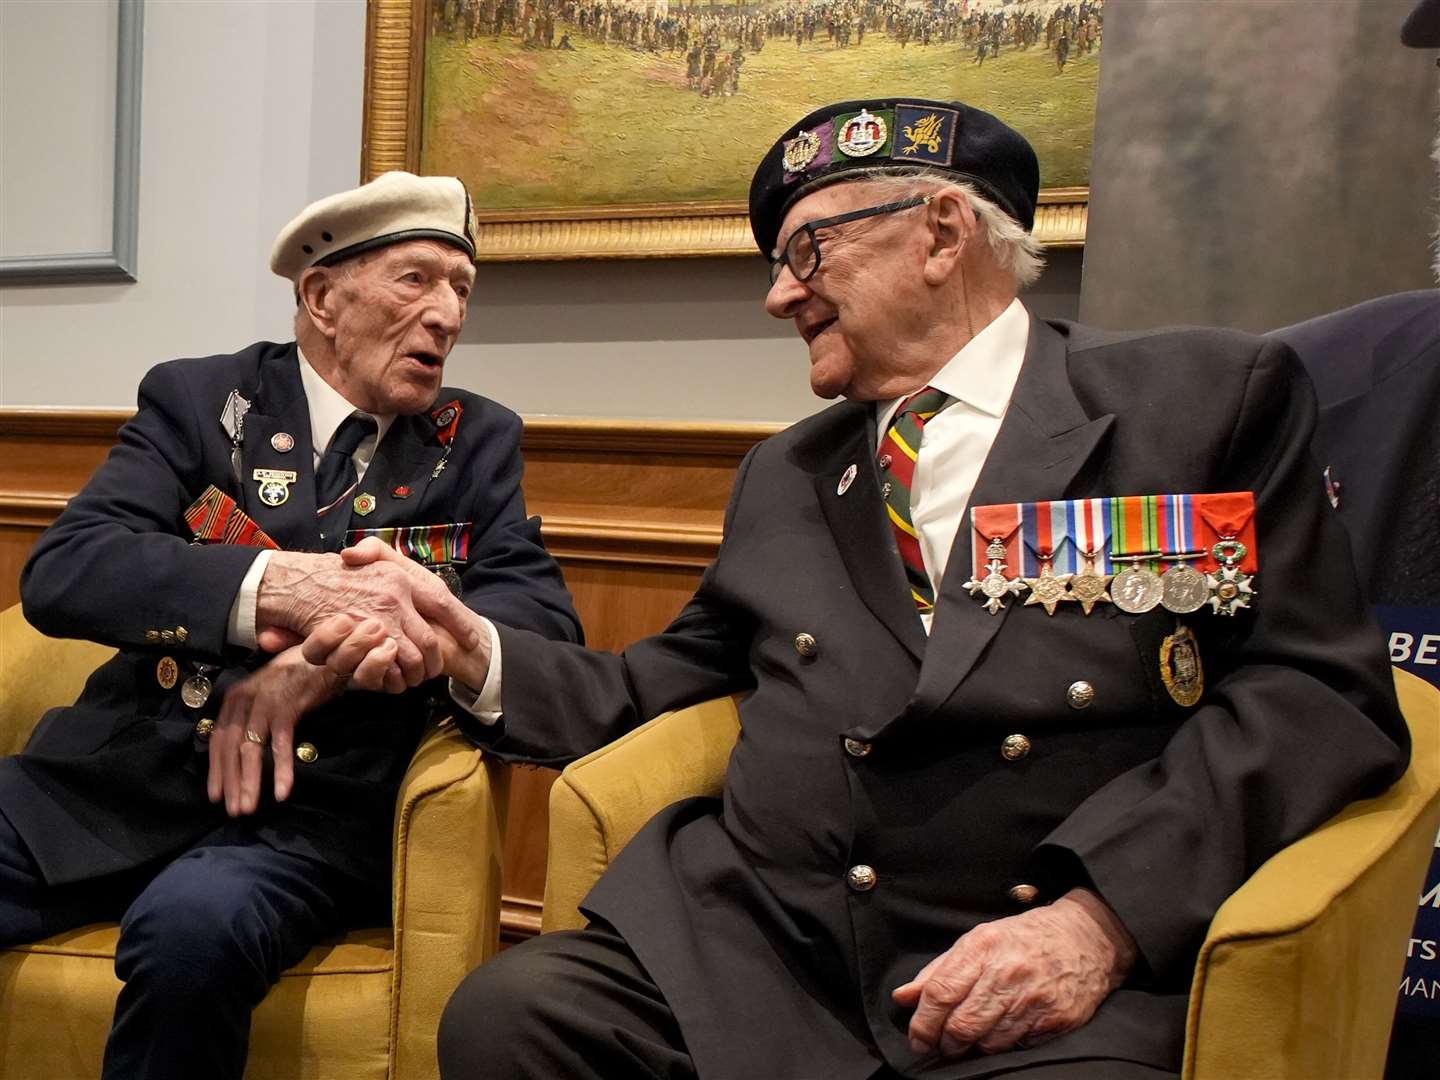 D-Day veterans Alec Penstone, 98, and Ken Hay, 98, told the students about their experiences (GAreth Fuller/PA)